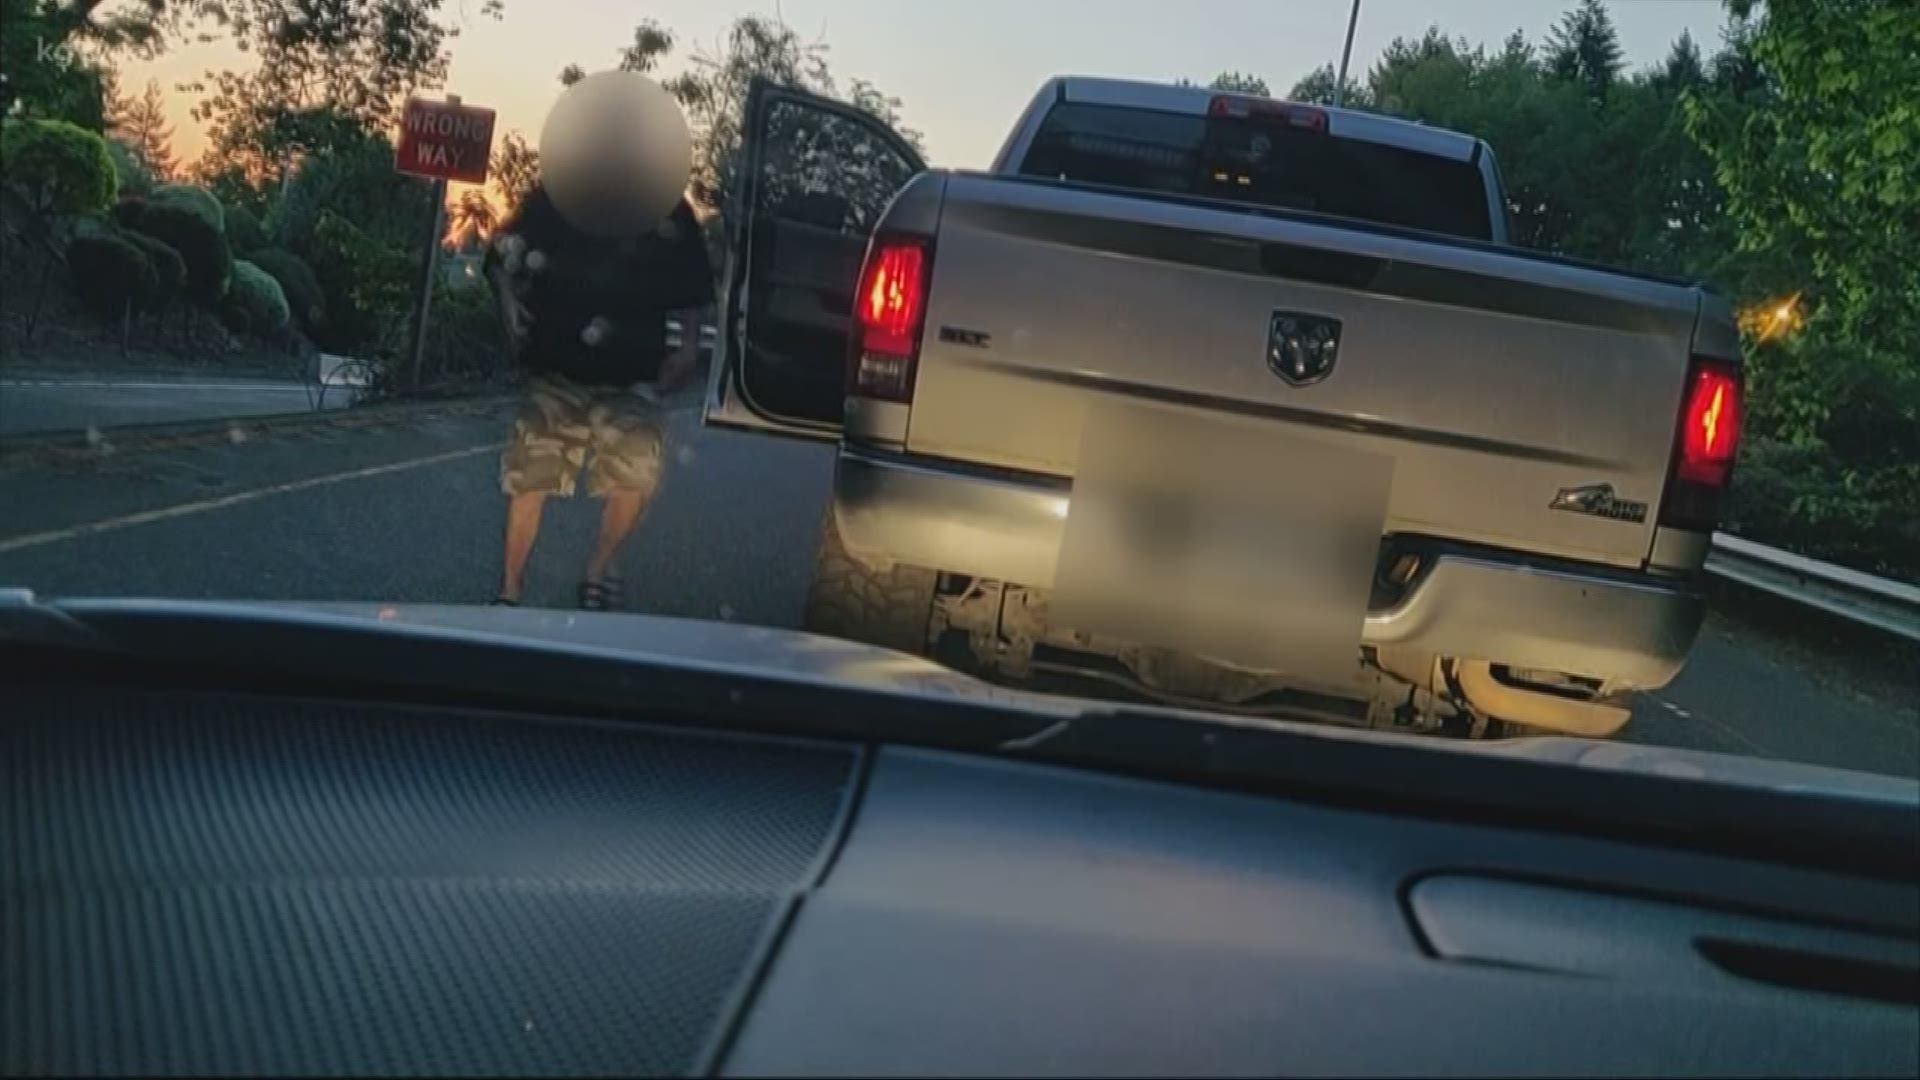 A road rage incident was caught on video.